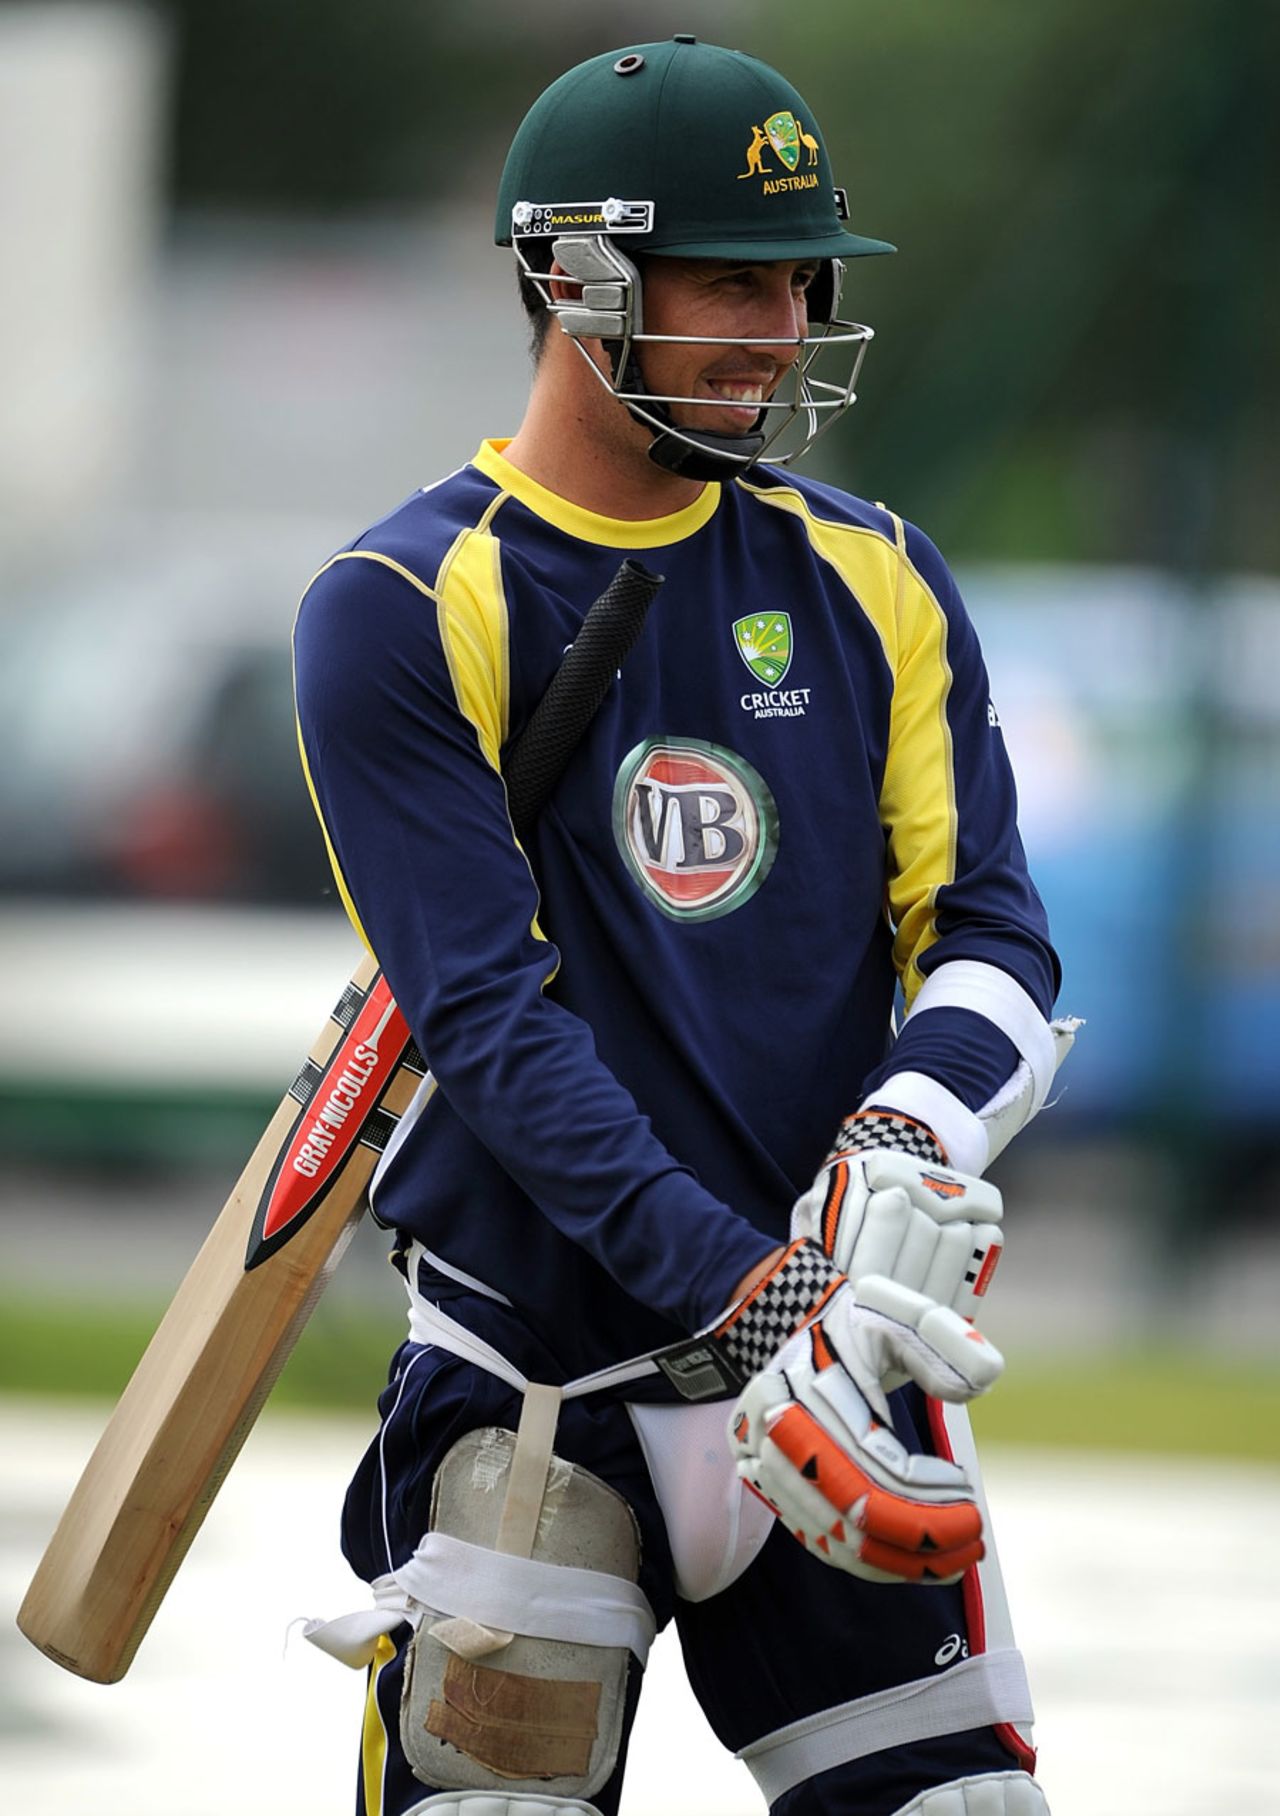 Tom Cooper pulls on his gloves, Old Trafford, August 6, 2012